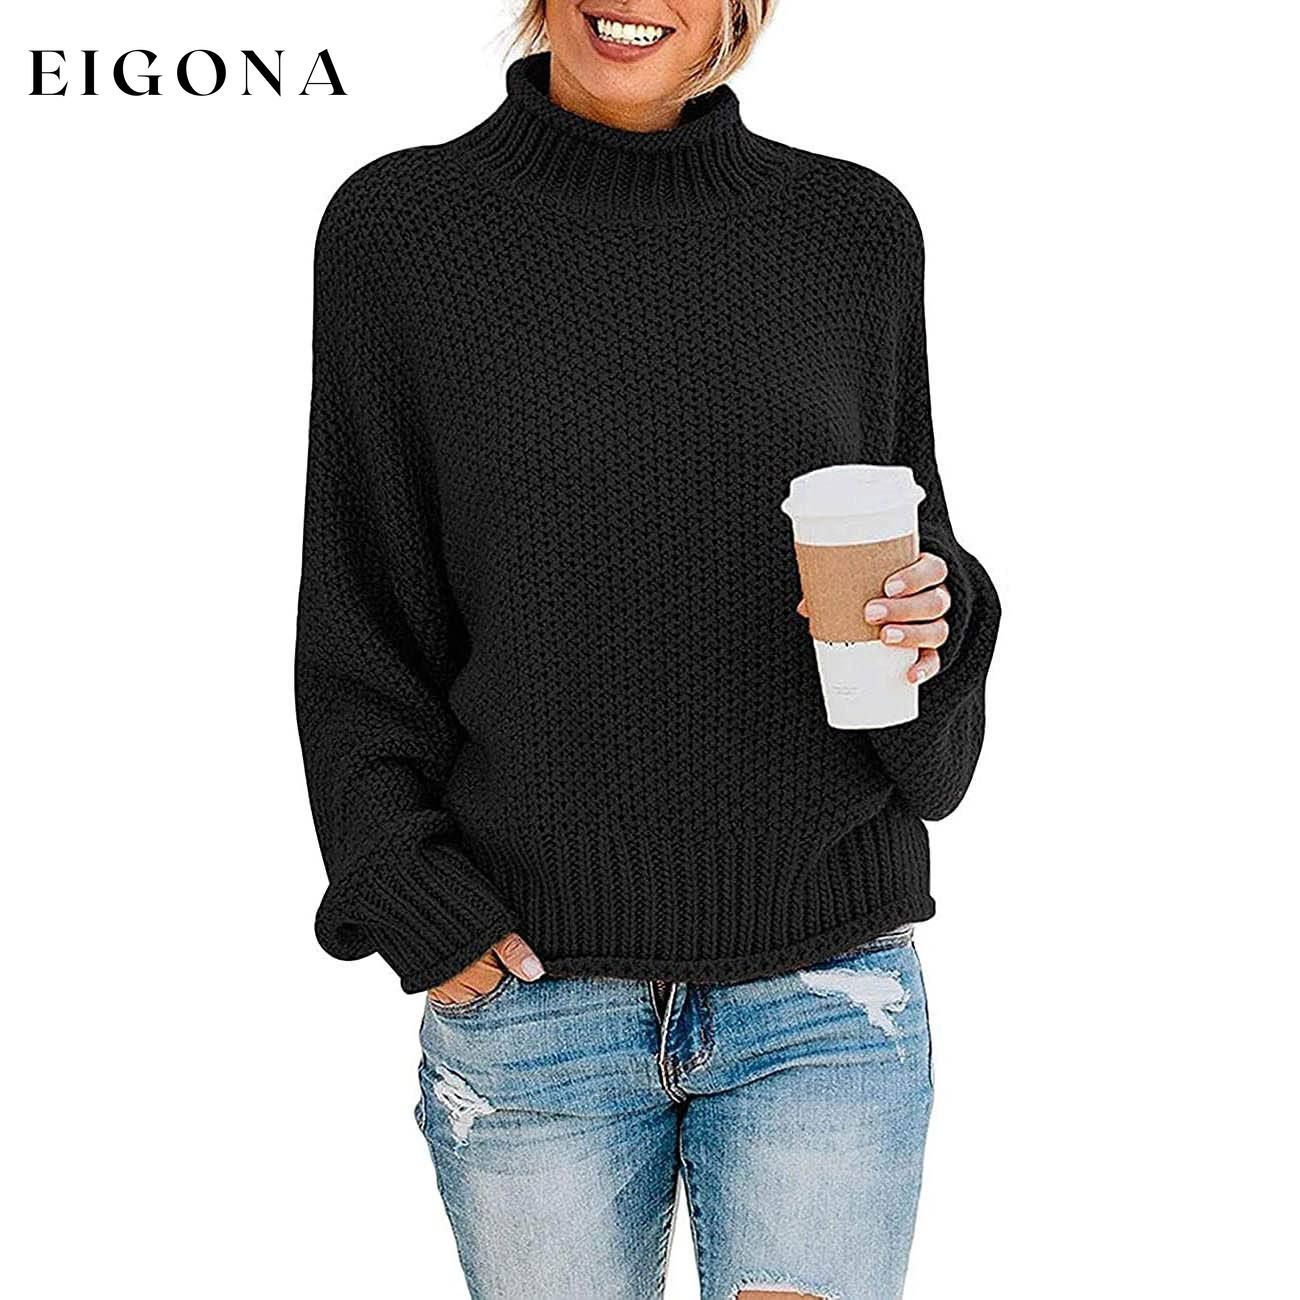 Women's Turtleneck Batwing Sleeve Loose Oversized Chunky Knitted Pullover Sweater Jumper Tops Black __stock:500 clothes refund_fee:1200 tops